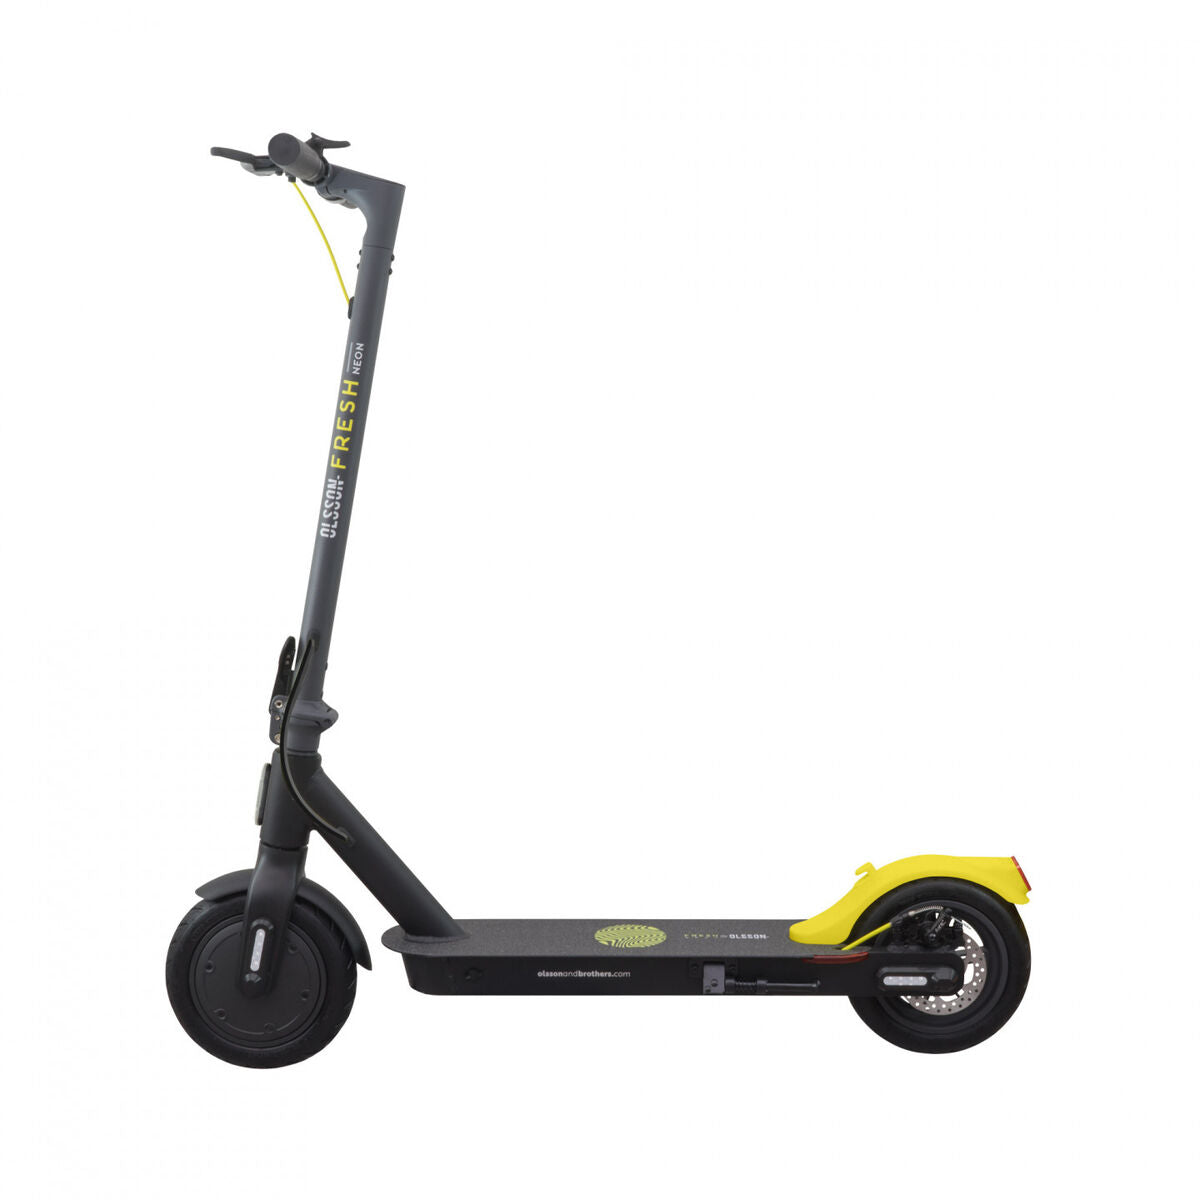 Electric Scooter Olsson Fresh Neon, Olsson, Sports and outdoors, Urban mobility, electric-scooter-olsson-fresh-neon, Brand_Olsson, category-reference-2609, category-reference-2629, category-reference-2904, category-reference-t-19681, category-reference-t-19756, category-reference-t-19876, category-reference-t-21245, Condition_NEW, deportista / en forma, Price_300 - 400, RiotNook